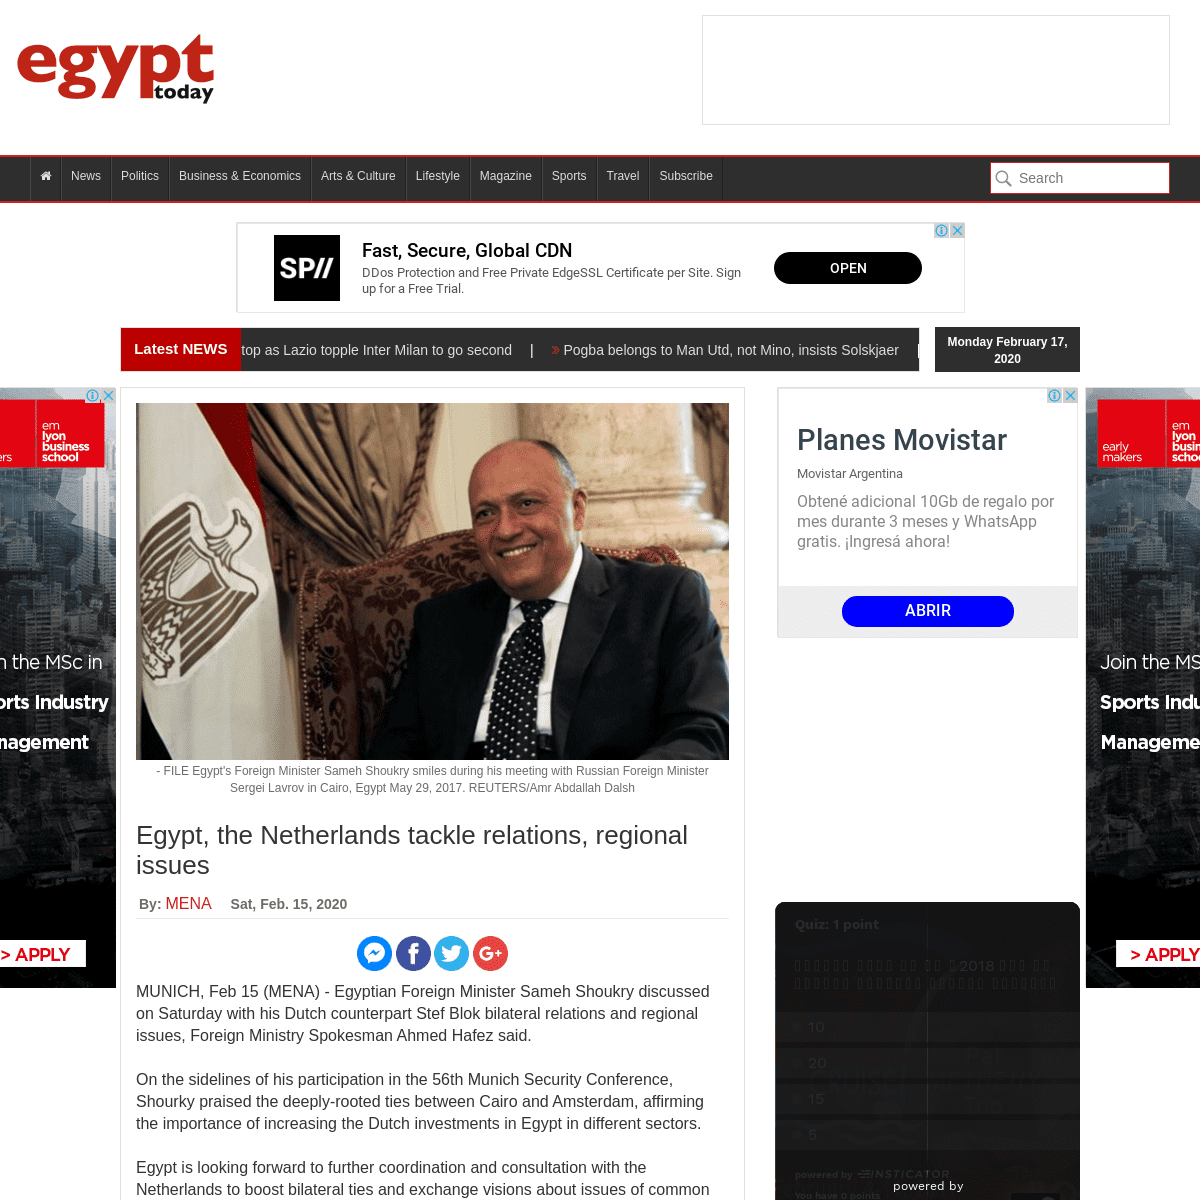 A complete backup of www.egypttoday.com/Article/2/81658/Egypt-the-Netherlands-tackle-relations-regional-issues